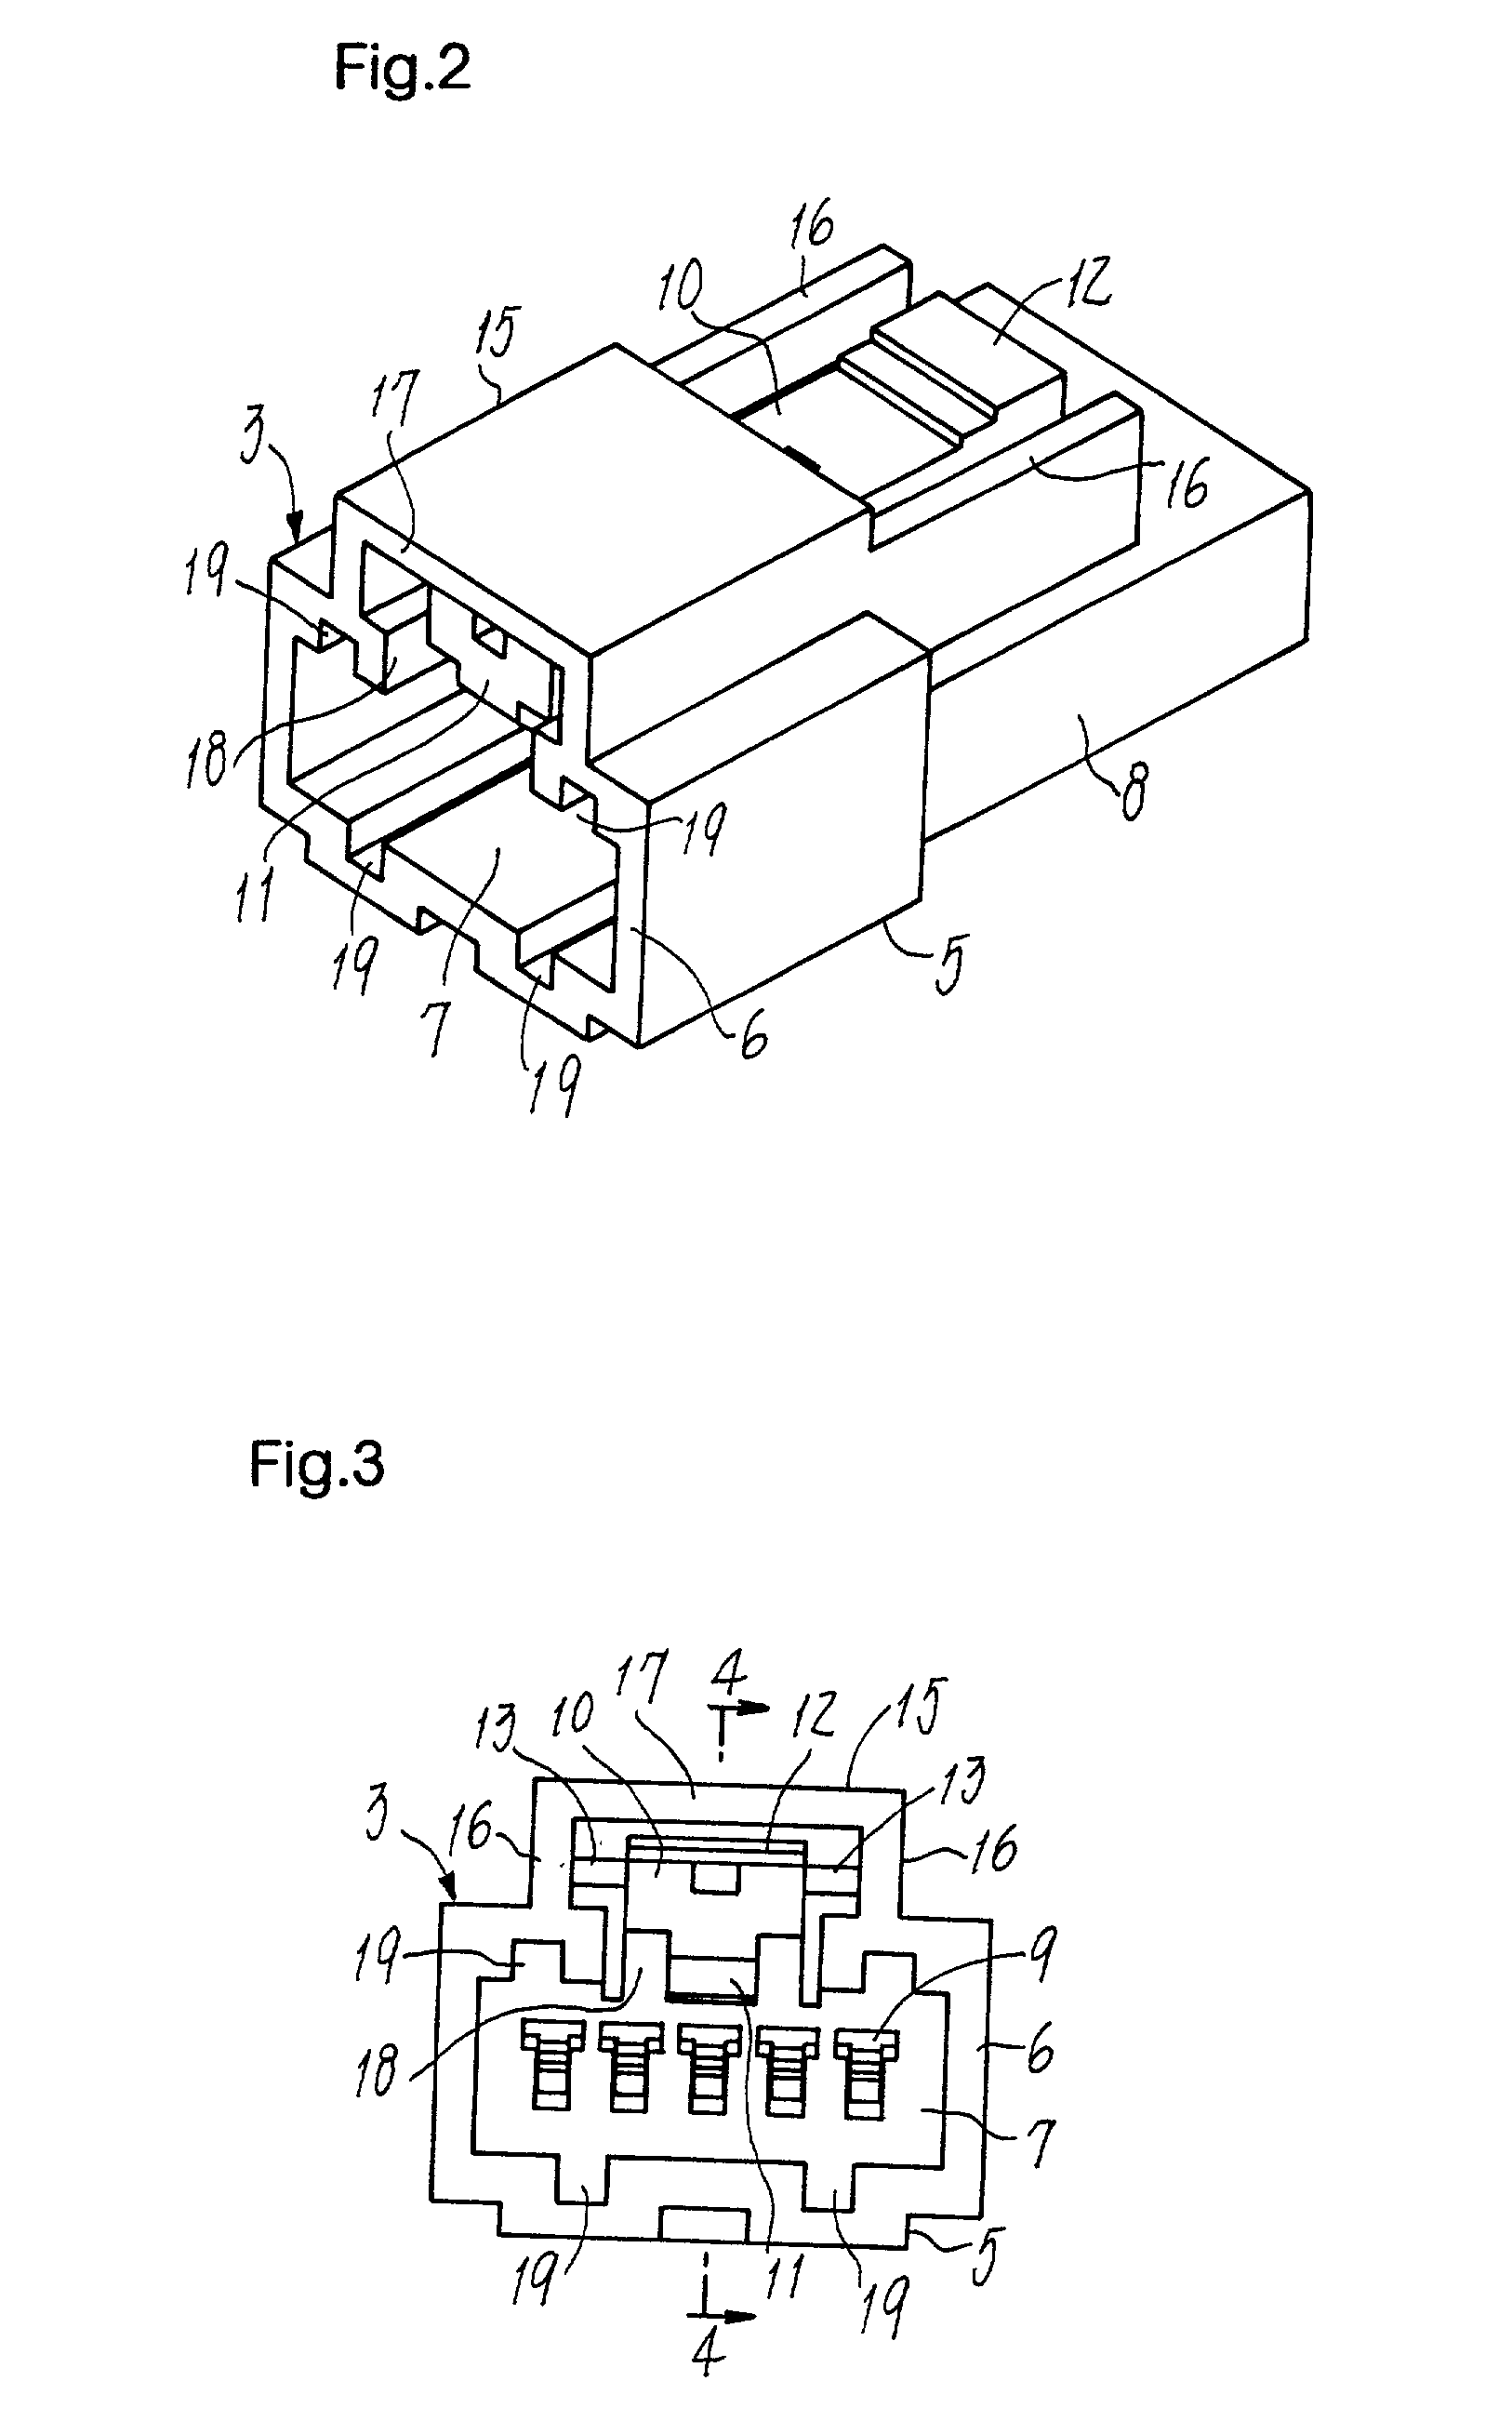 Connector assembly having a latching mechanism